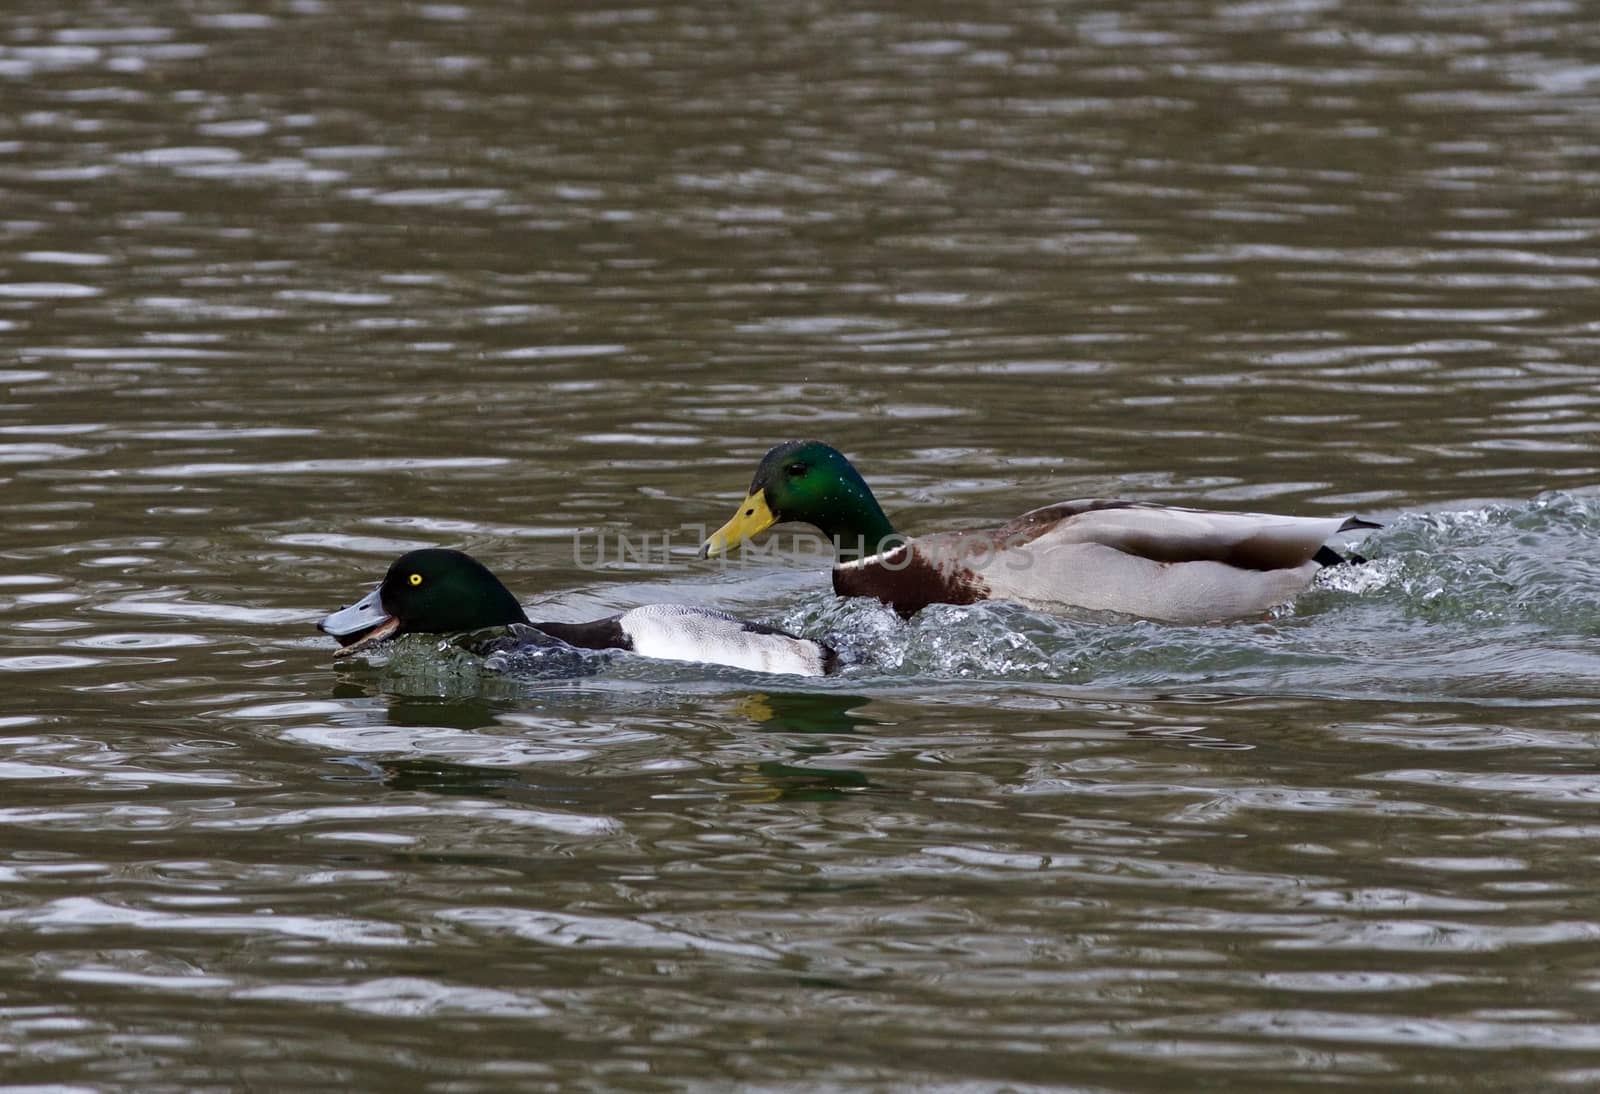 Funny photo of a duck chasing another